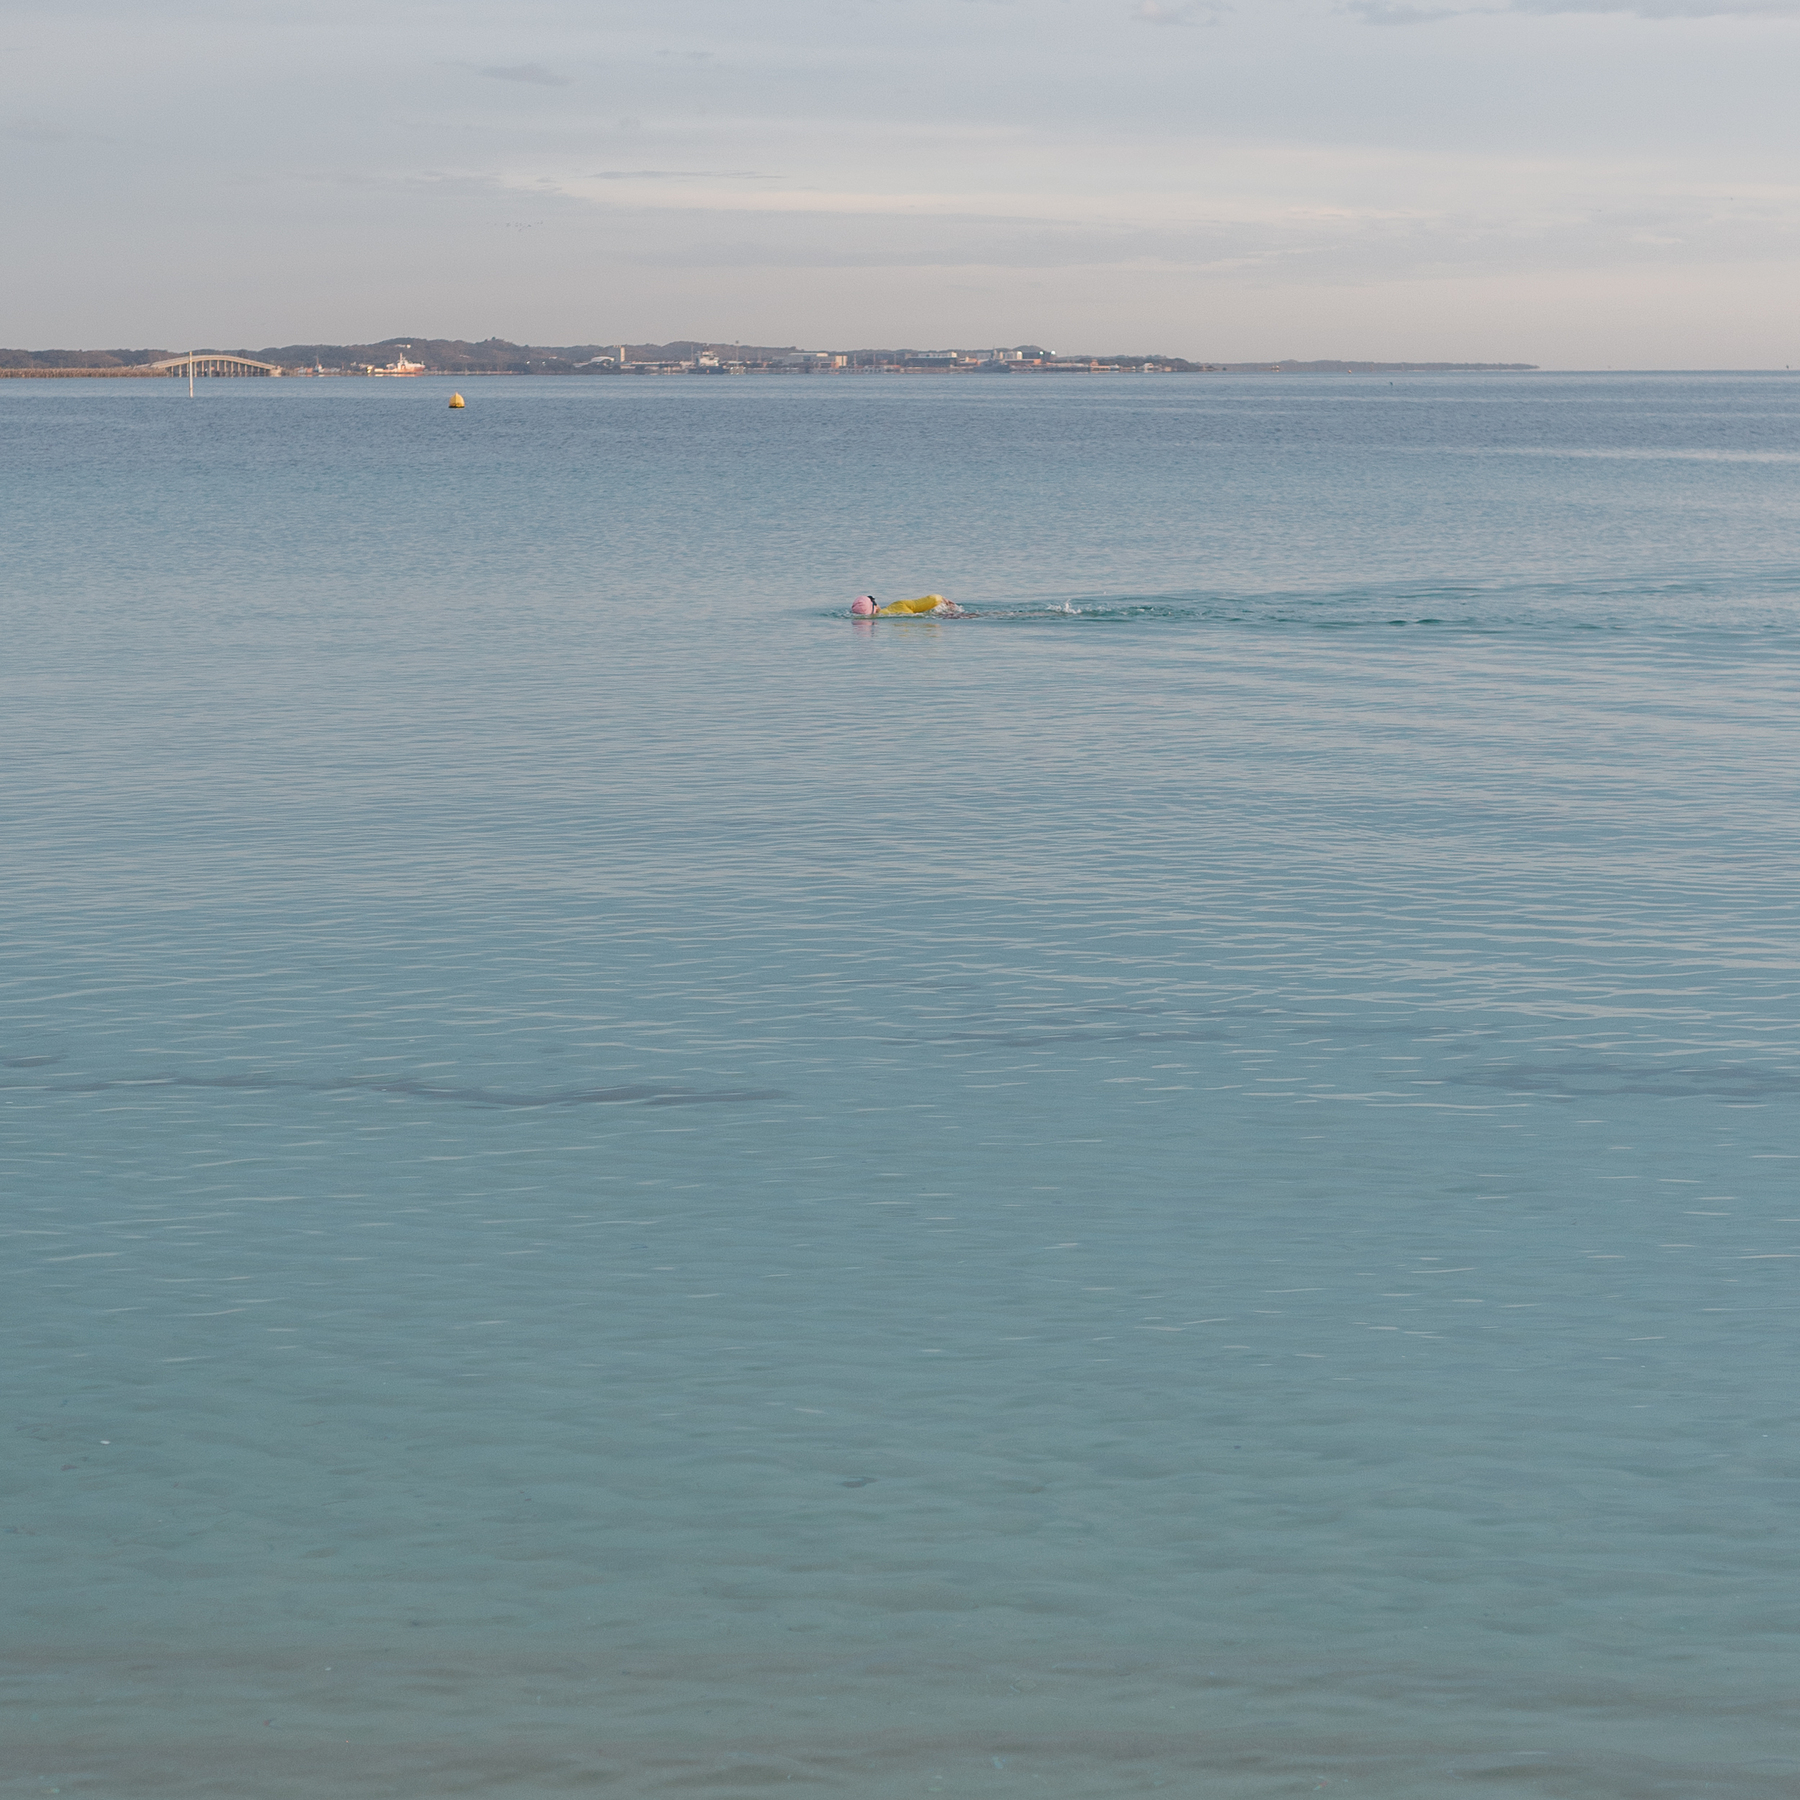 Auto-generated description: A person is swimming in a calm blue sea with a buoy nearby, and a bridge connects the distant landmasses under a soft cloudy sky.